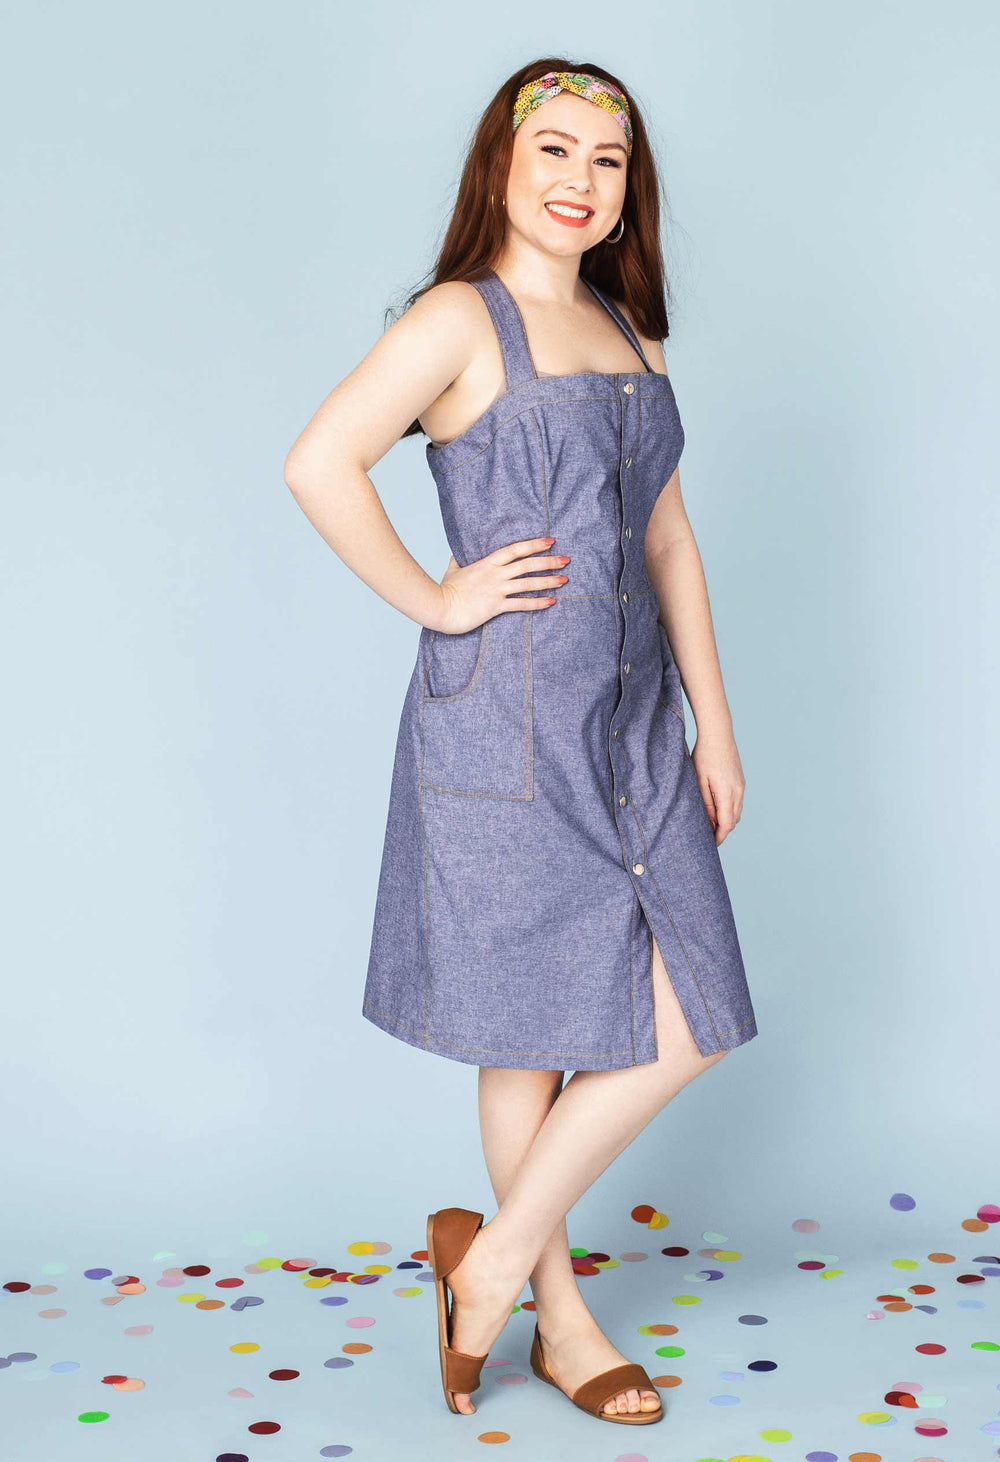 Woman wearing the Daiquiri Dress sewing pattern from Our Lady of Leisure on The Fold Line. A dress pattern made in denims, twill, duck, corduroy, chino, cotton, linen or tencel fabrics, featuring a fitted silhouette, princess-seamed bodice, centre front b